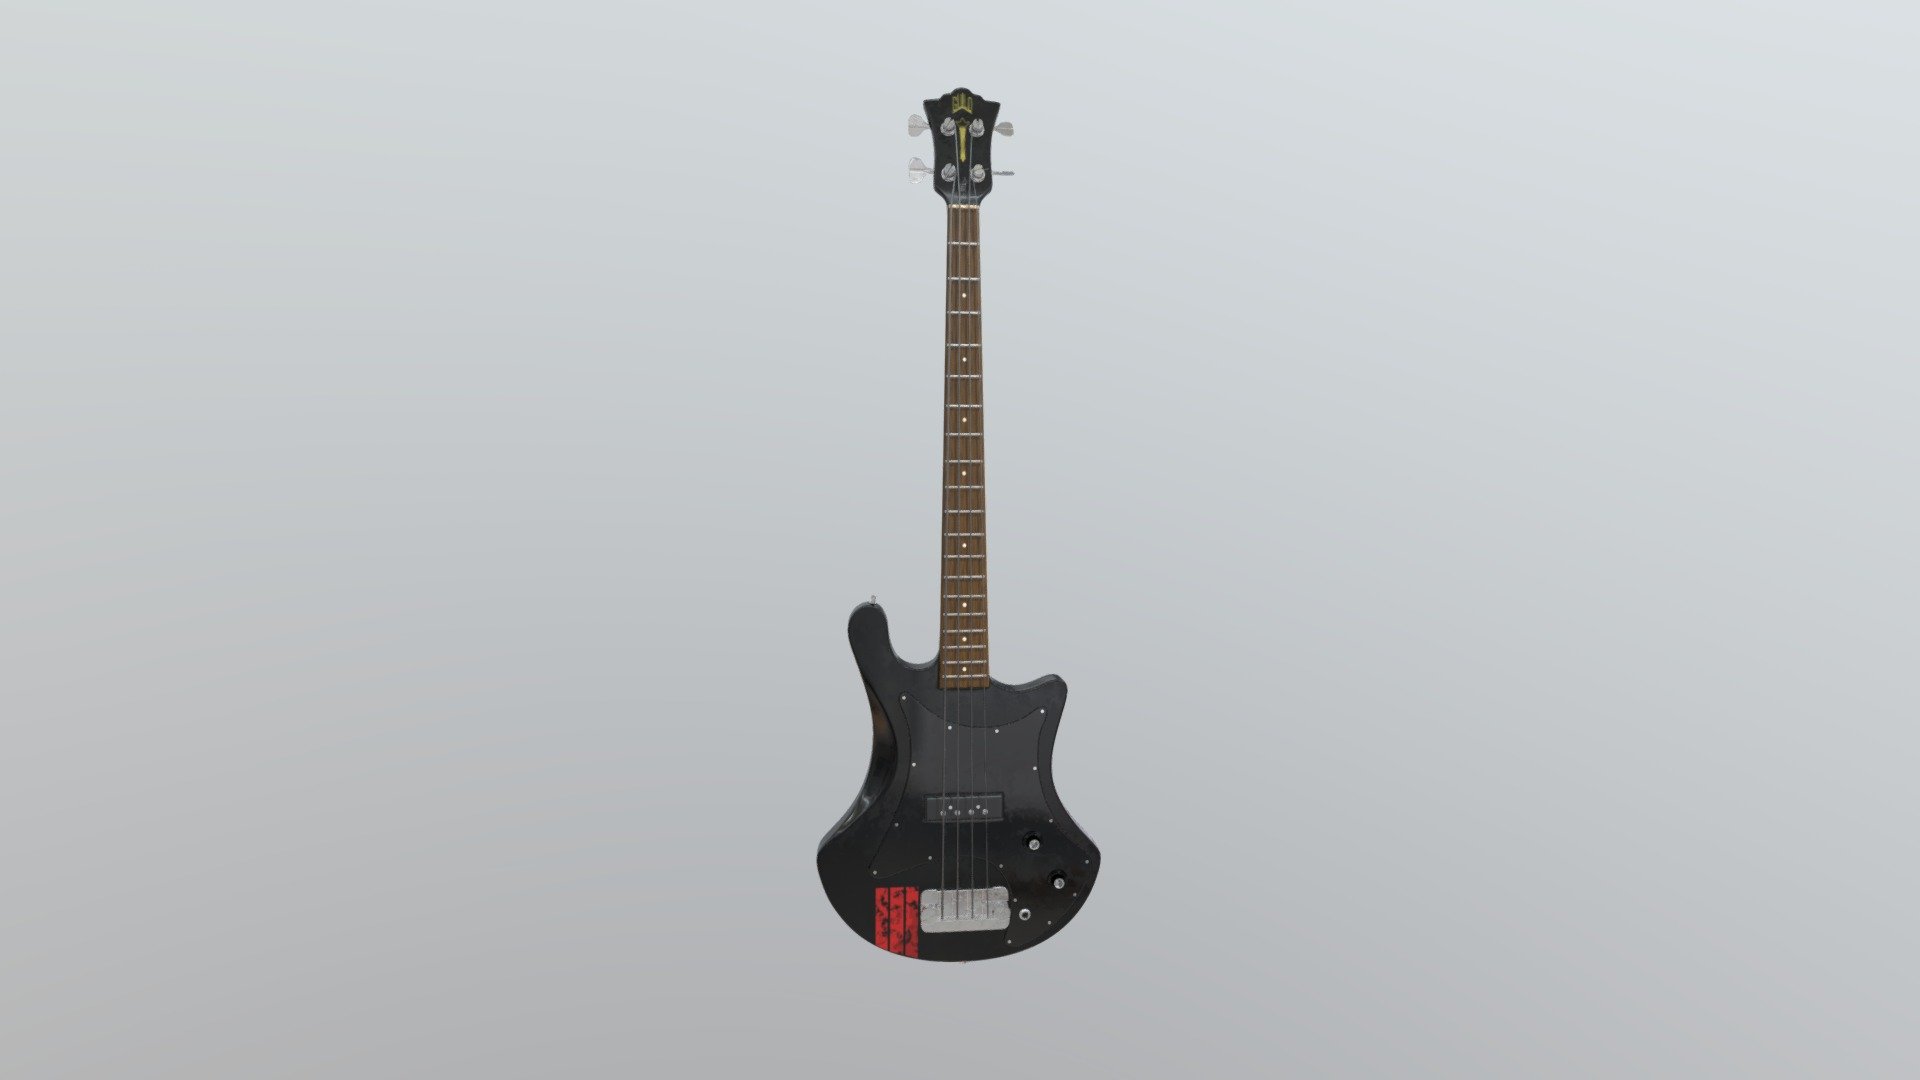 One bass to rule them all!  The Guild B-301.

Modelled on my own guitar, which was made in 1977 if memory serves 3d model